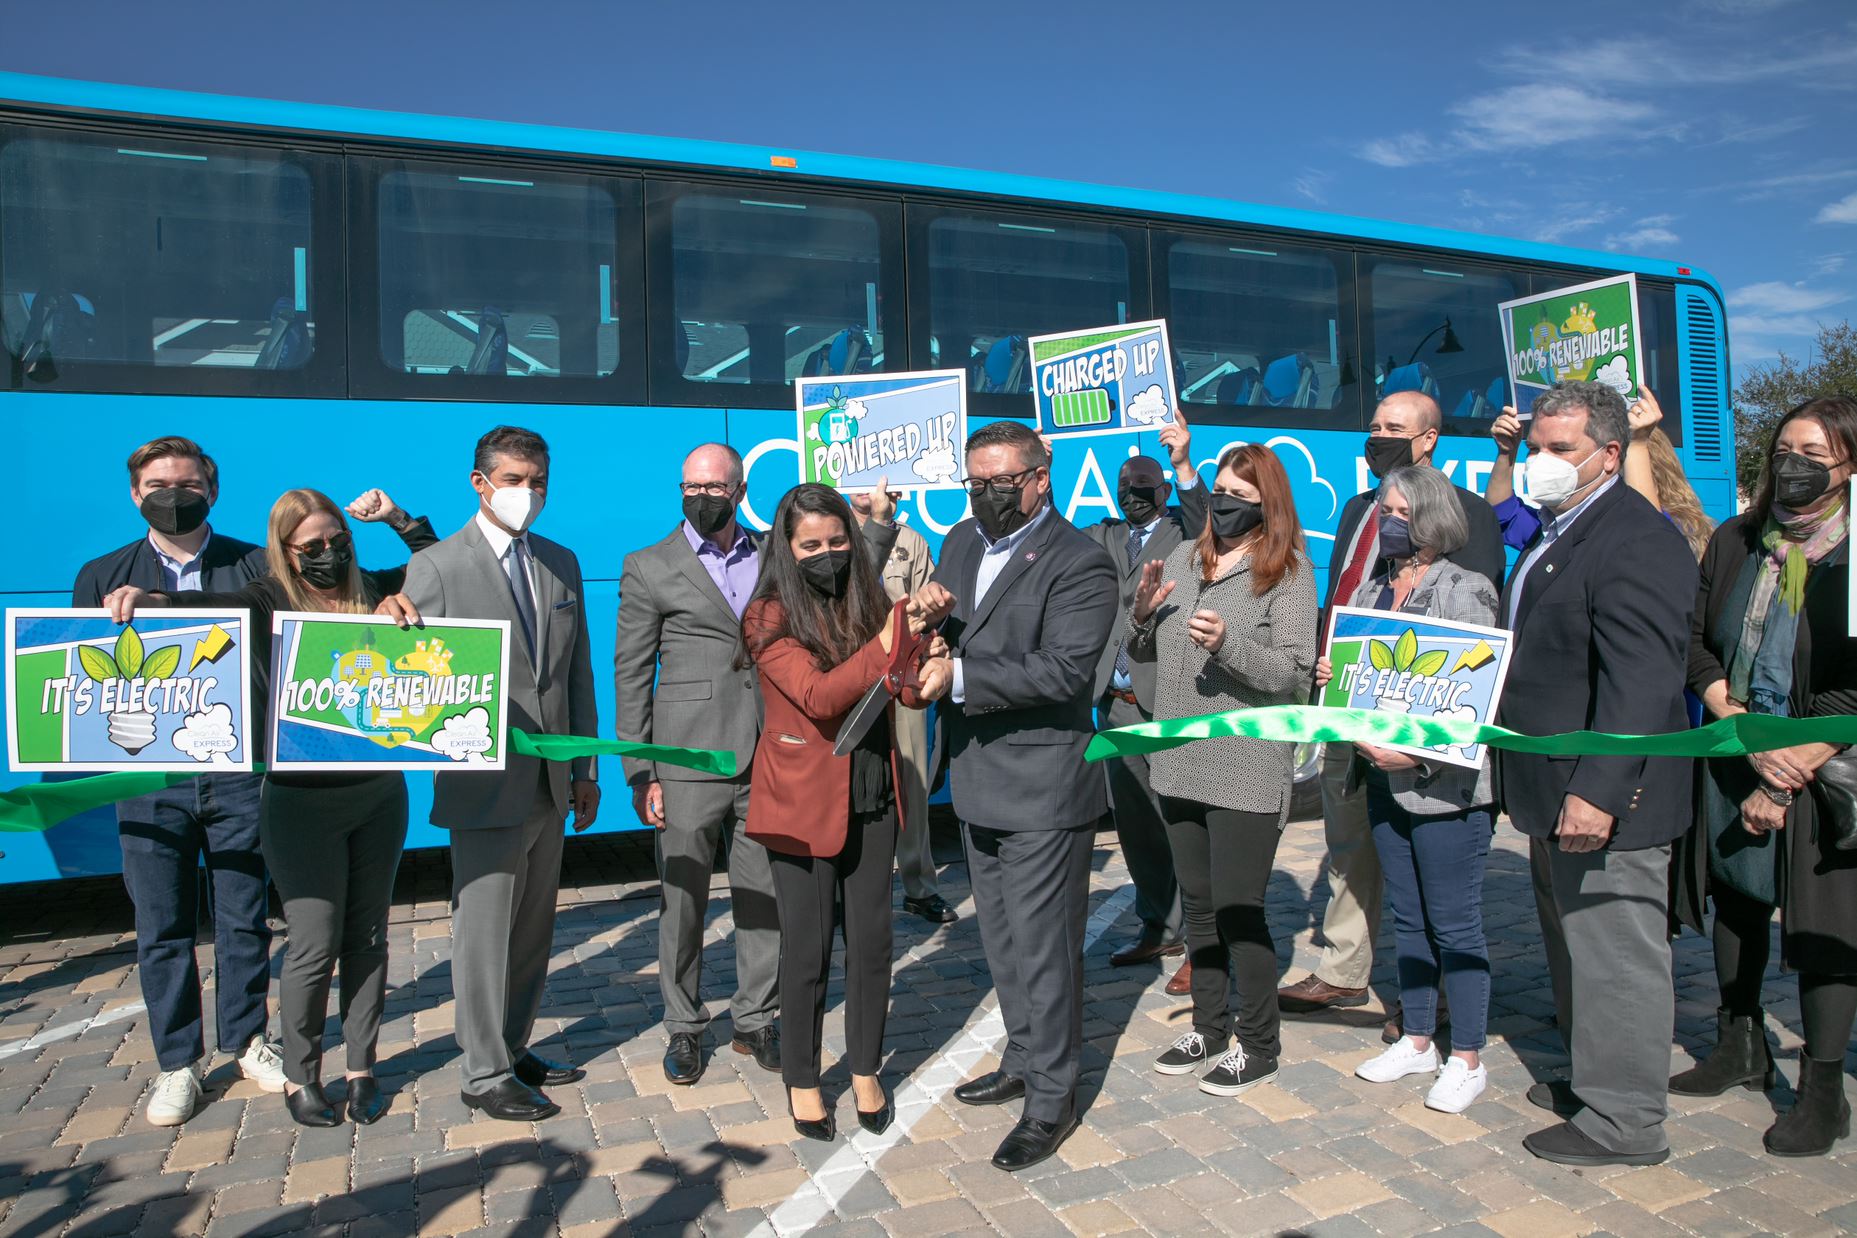 Santa Barbara County’s first-ever electric commuter bus is unveiled on January 28, at the Avenue of the Flags in Buellton. Photo by BYD.